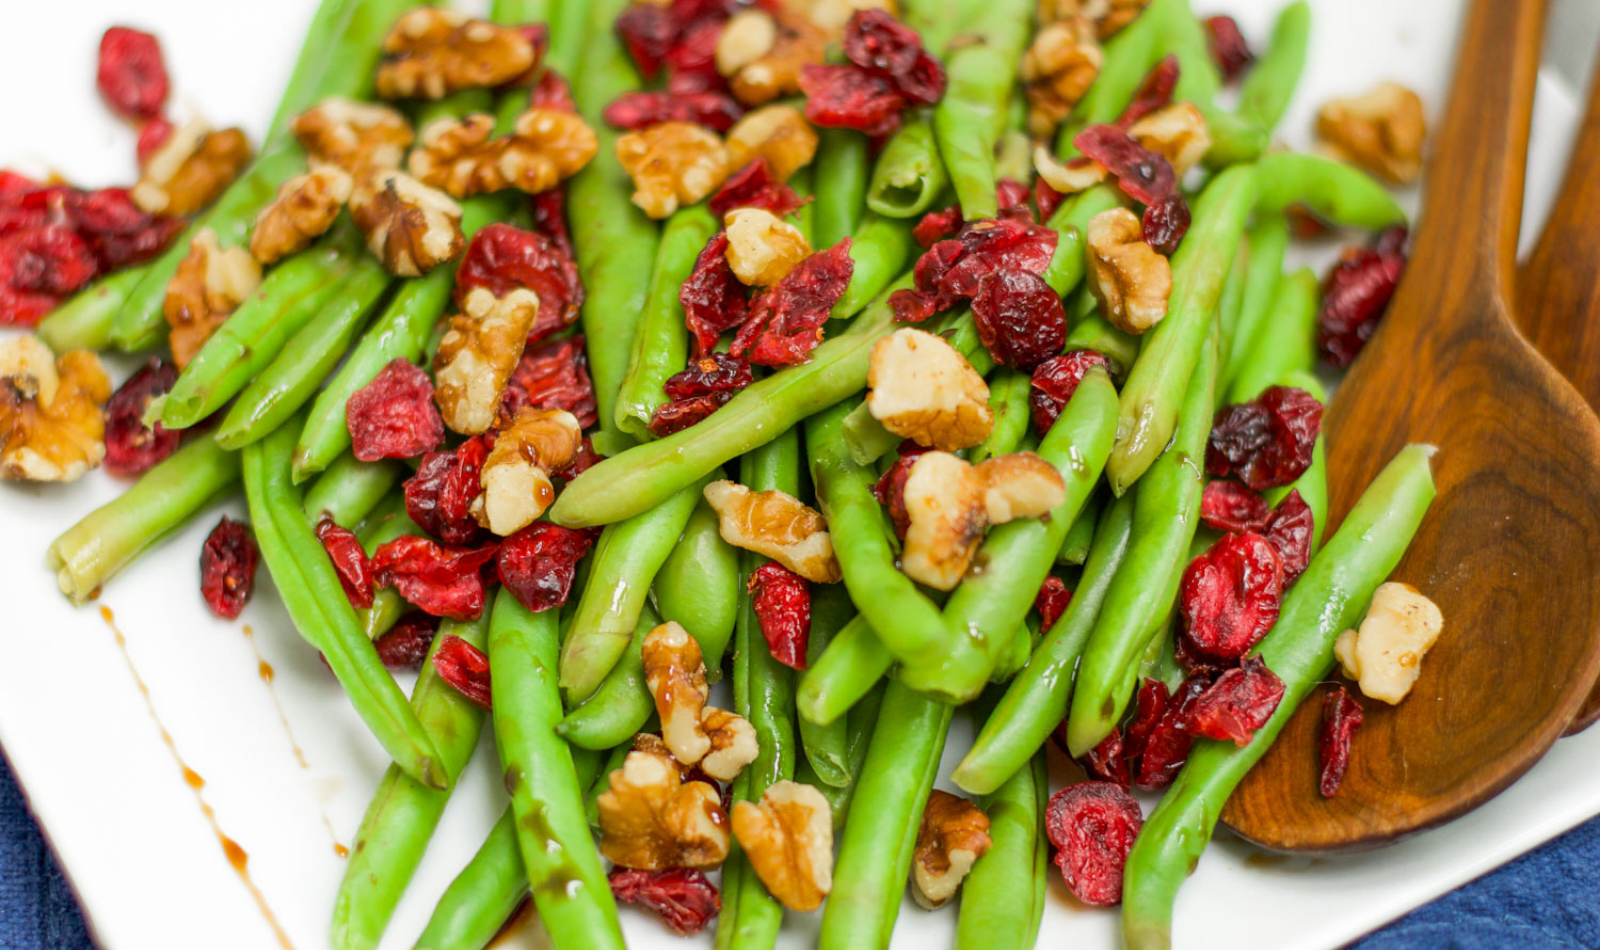 Blog Featured Image - Green Beans with Cranberries & Walnuts